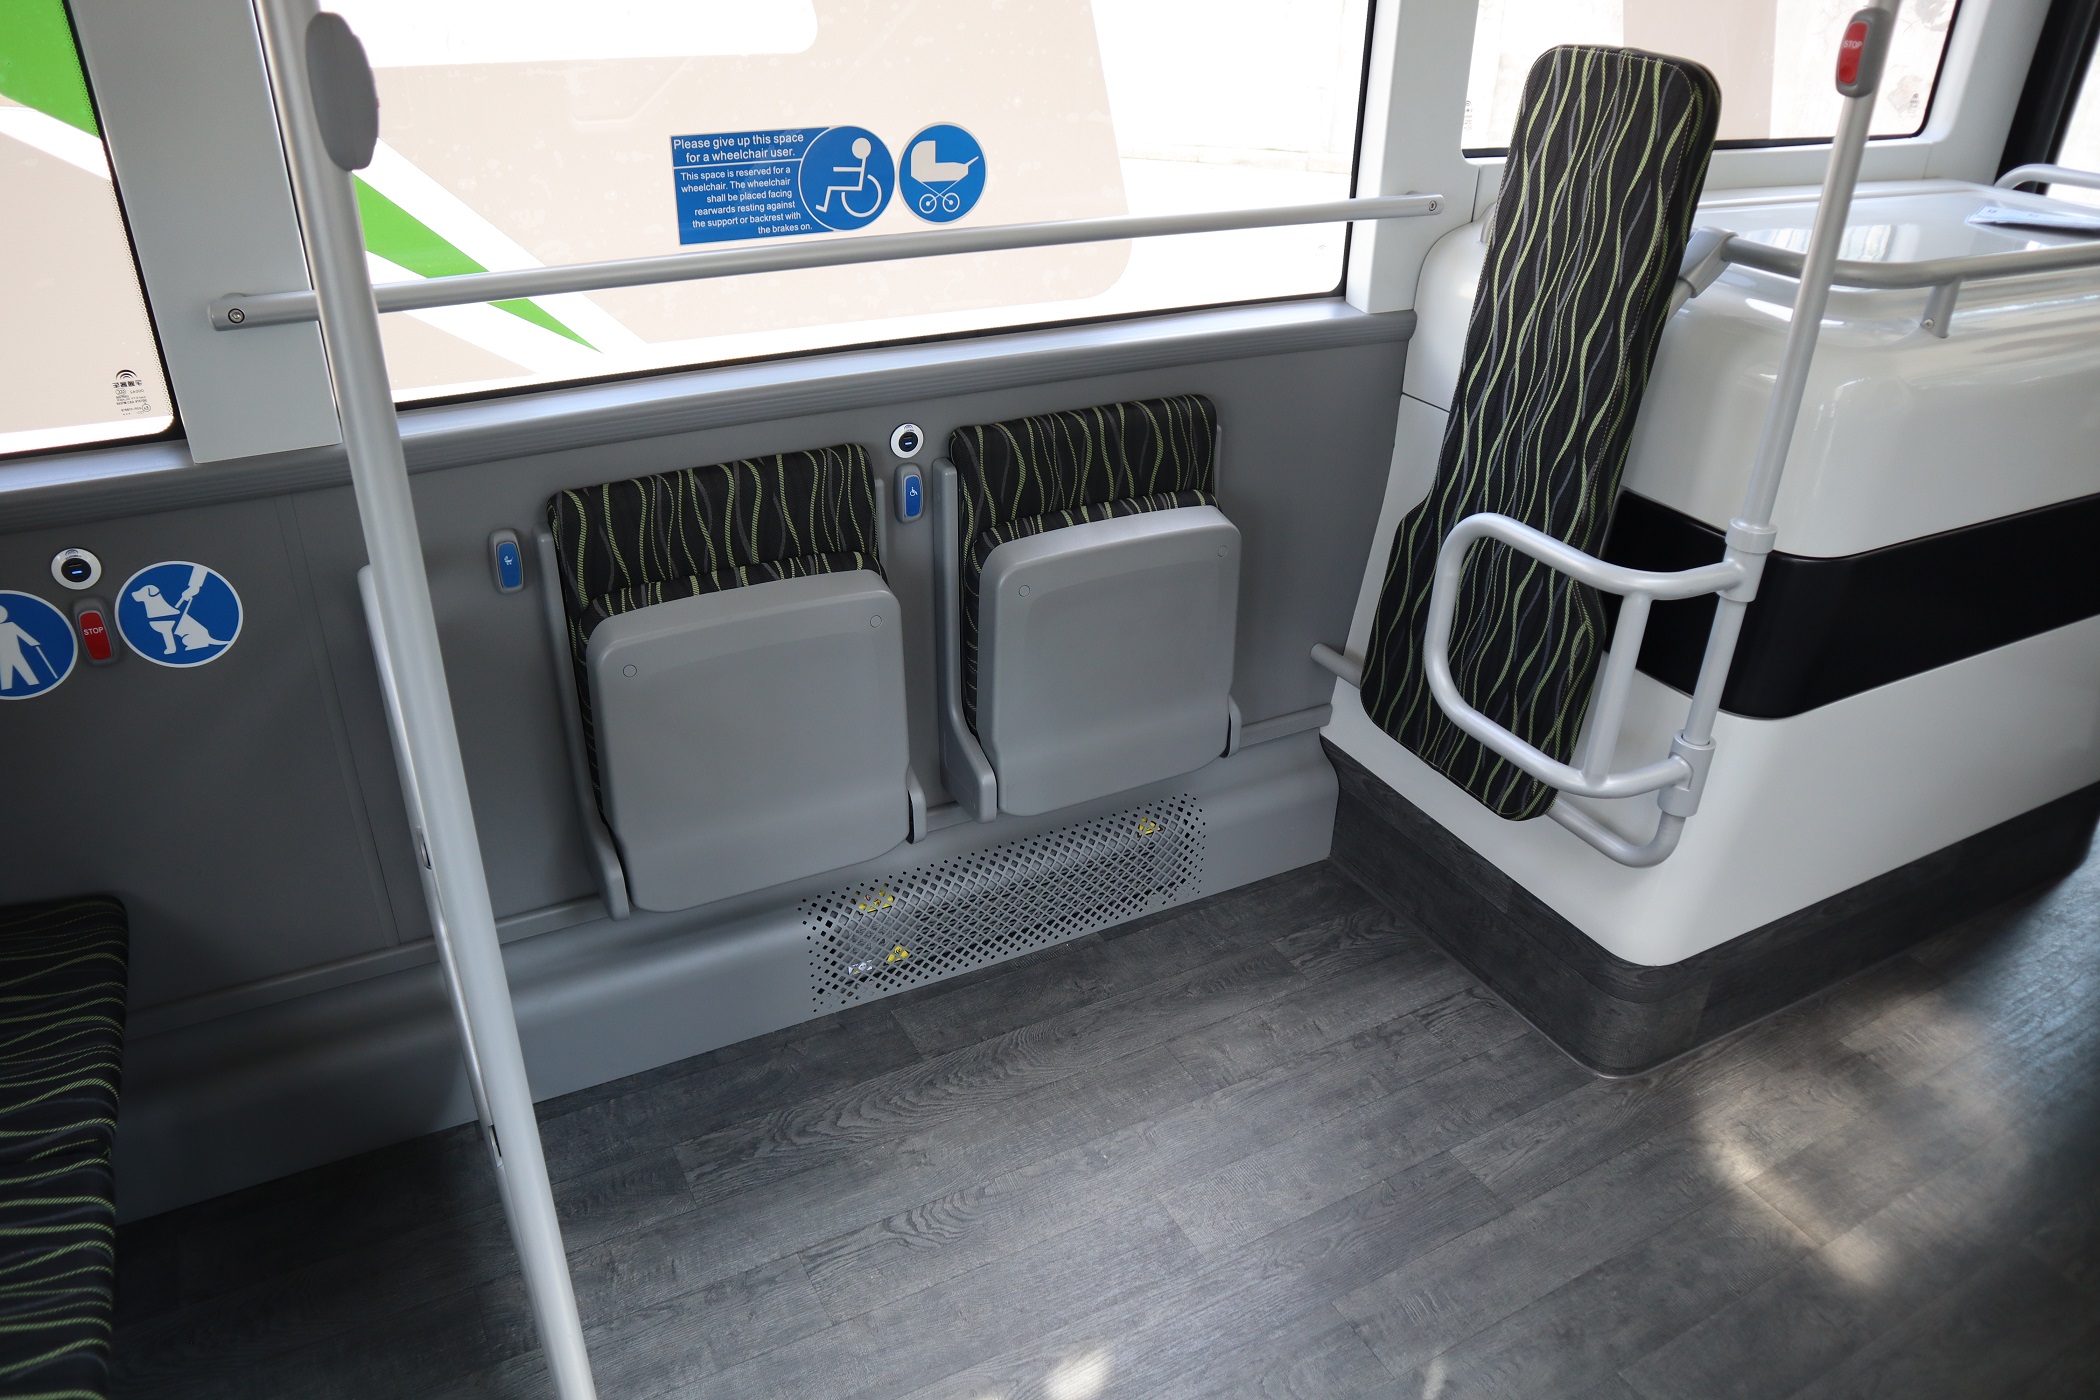 Lower saloon wheelchair user area of bus